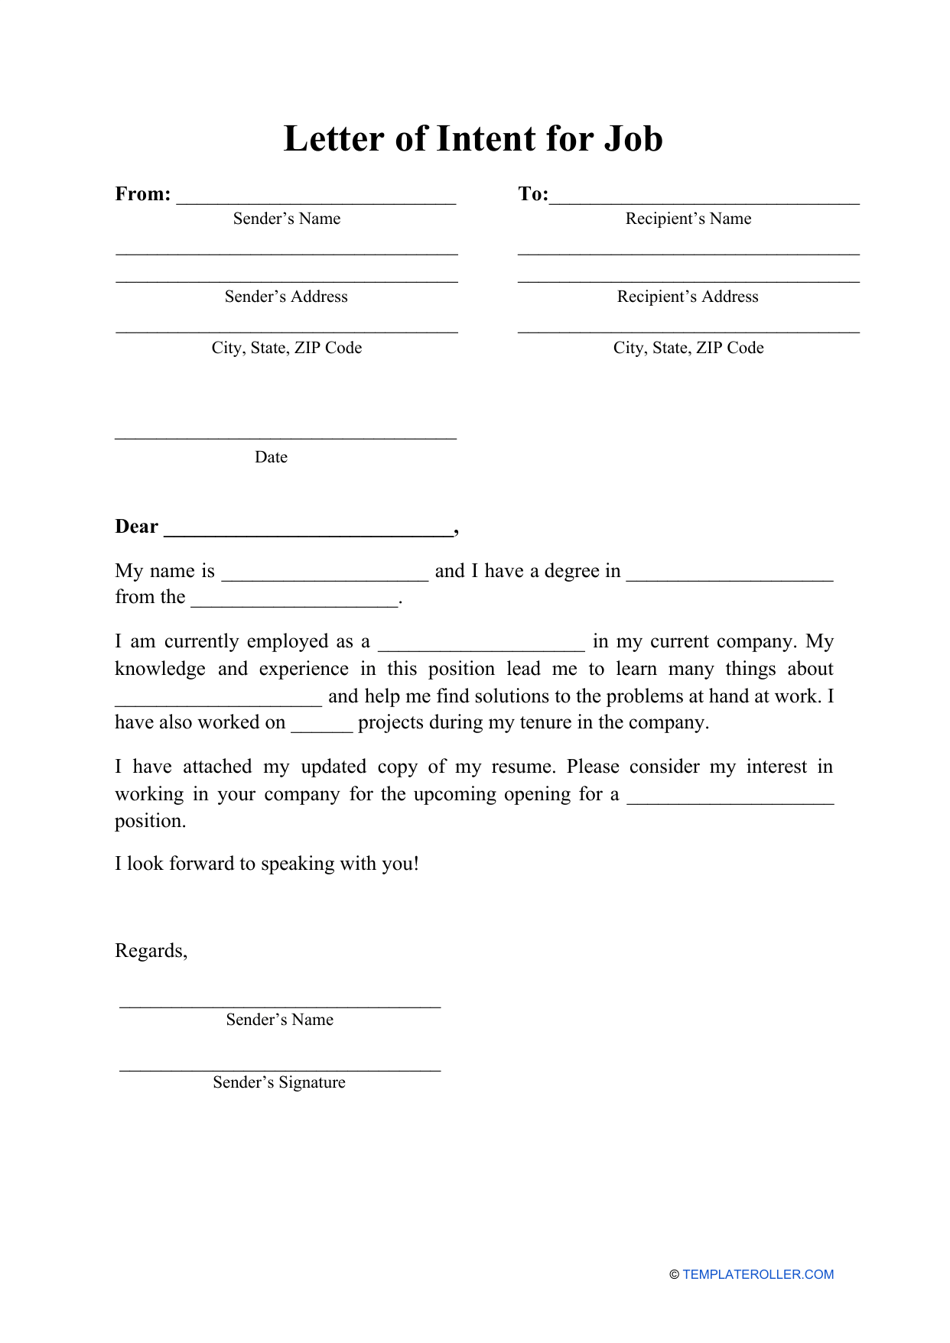 Letter of Intent for Job Template, Page 1